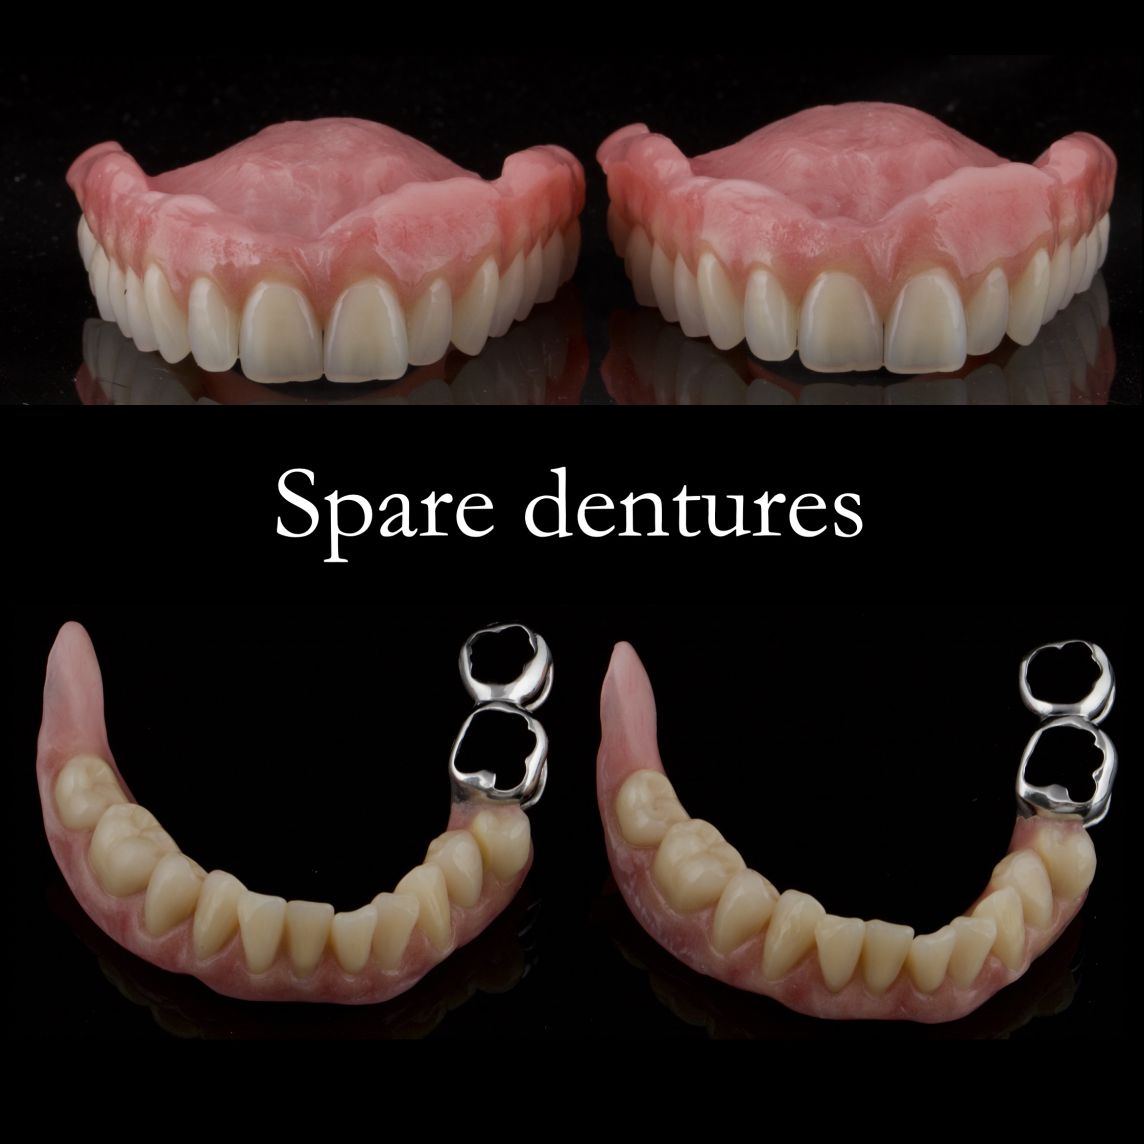 The importance of spare dentures